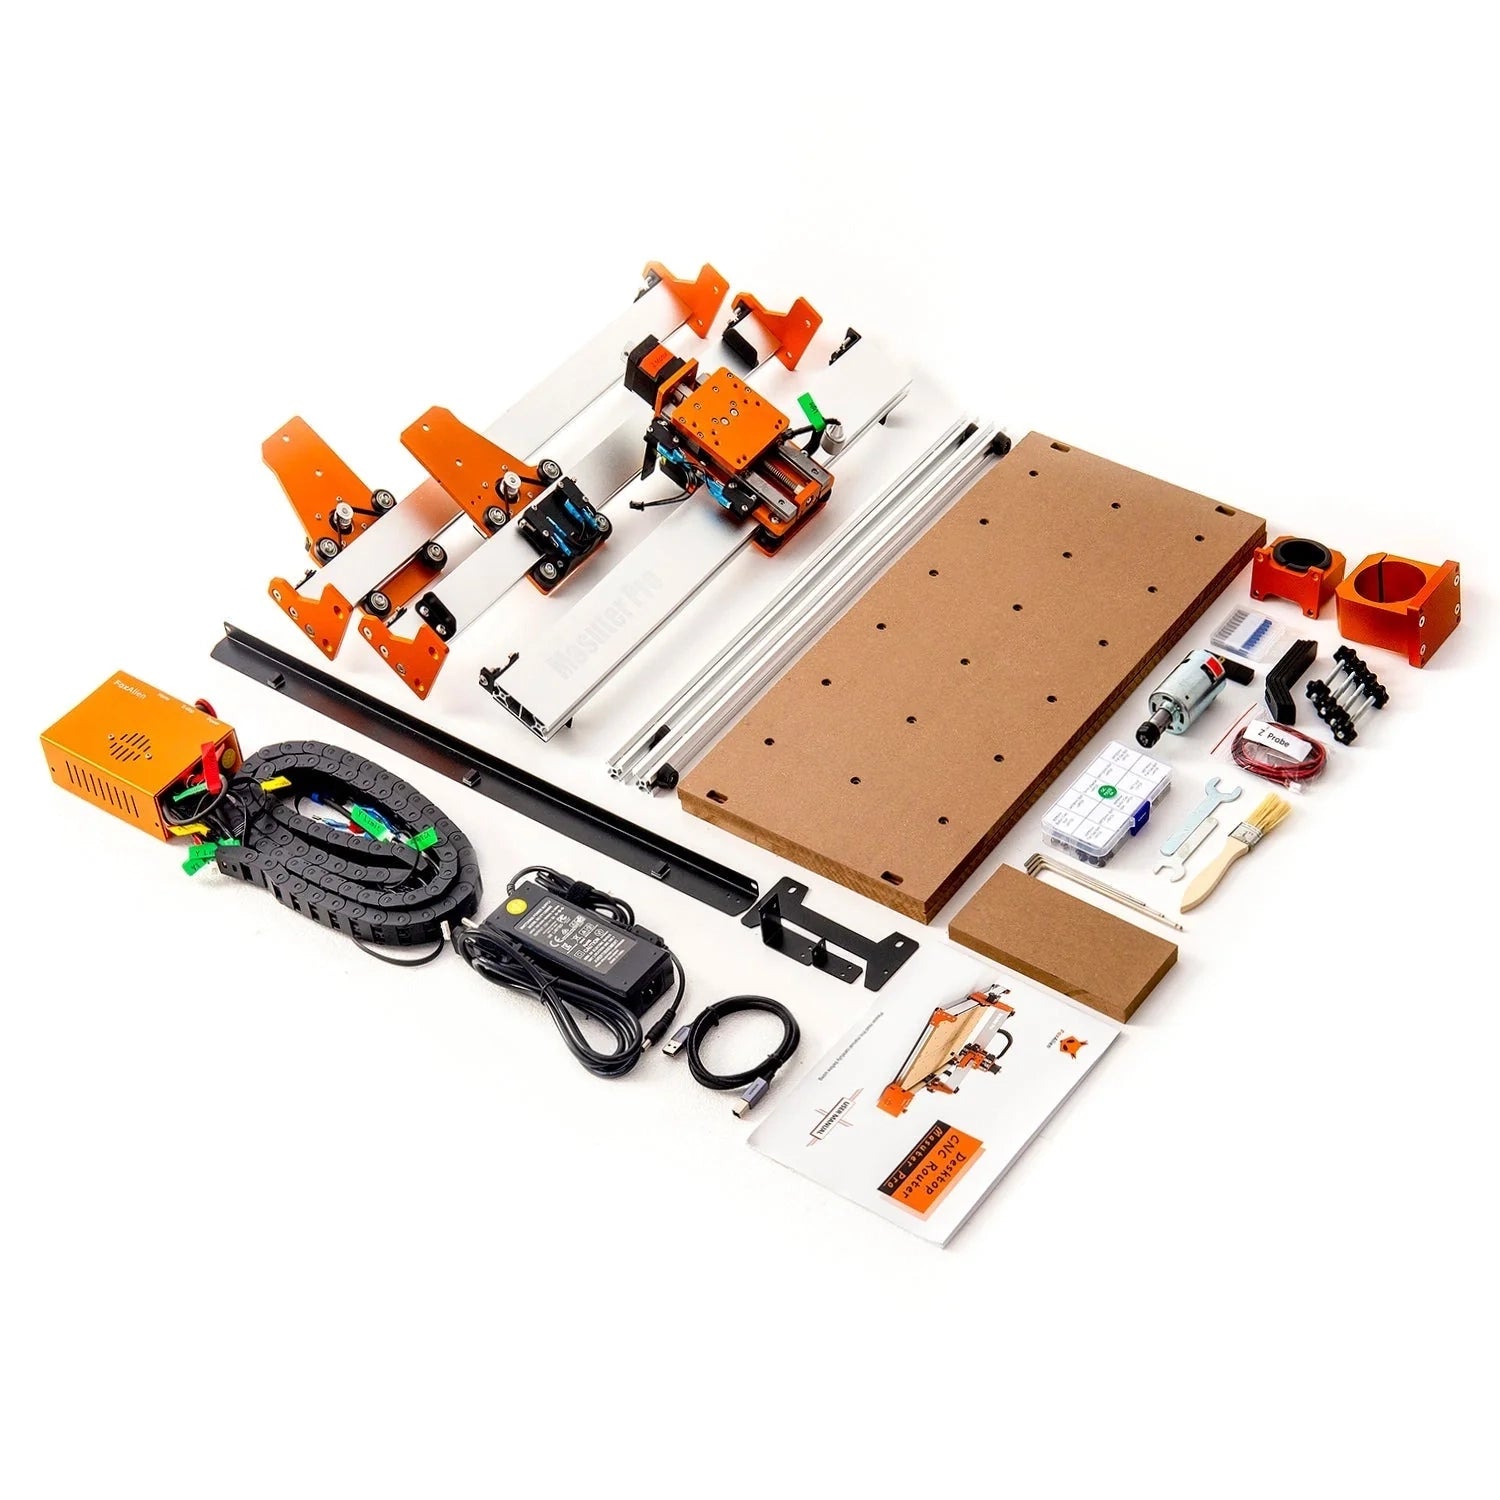 FoxAlien CNC Router Masuter Pro with 40W and Black R42 Rotary Roller Kit